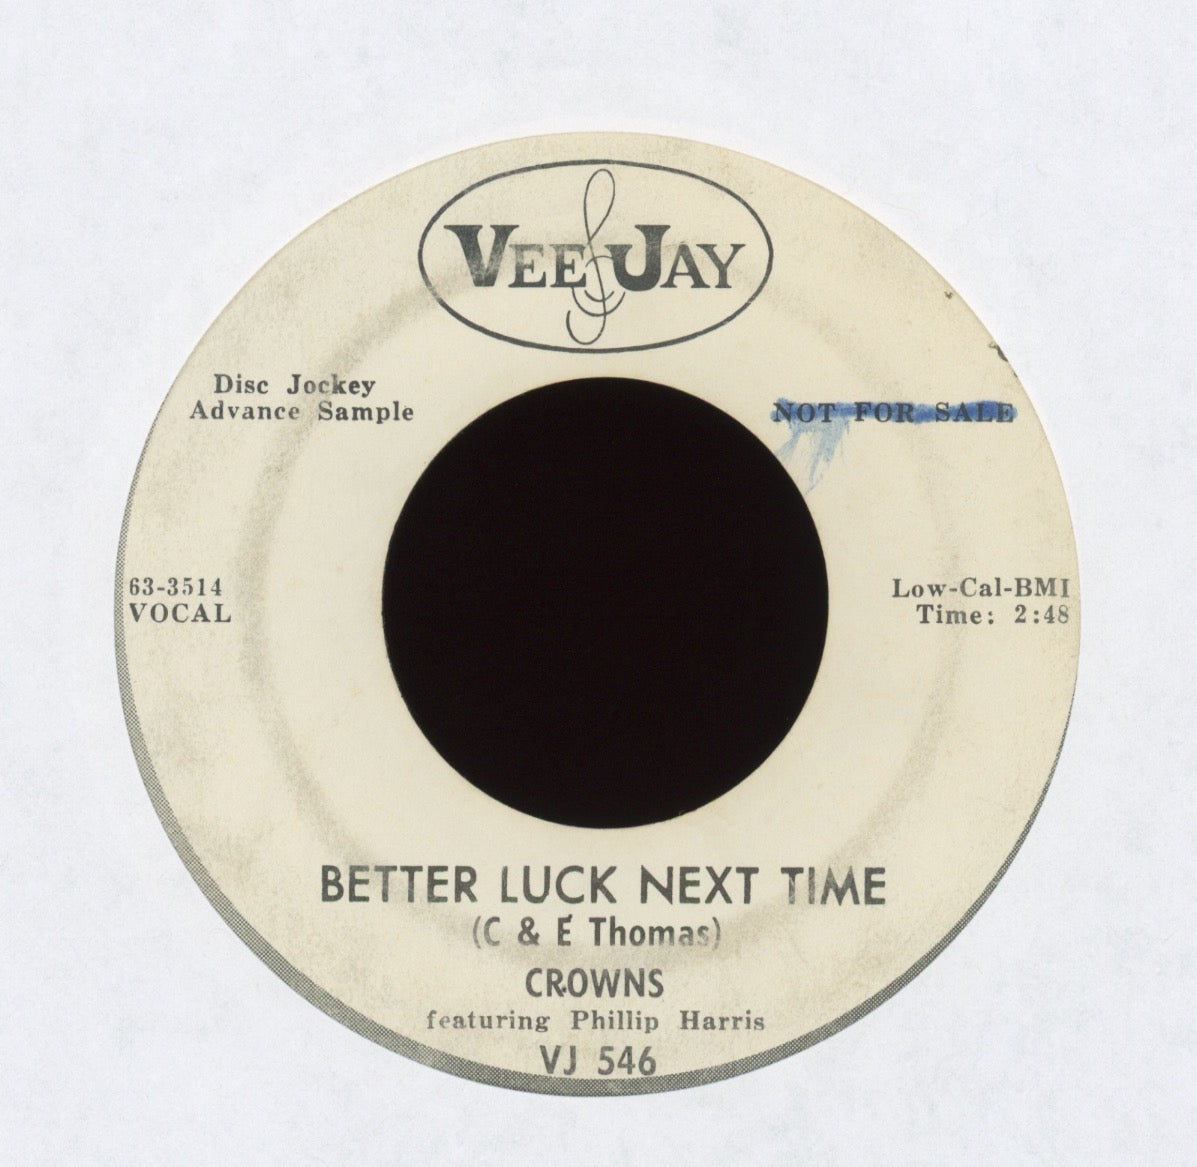 Crowns - Better Luck Next Time on Vee Jay Promo Northern Soul 45